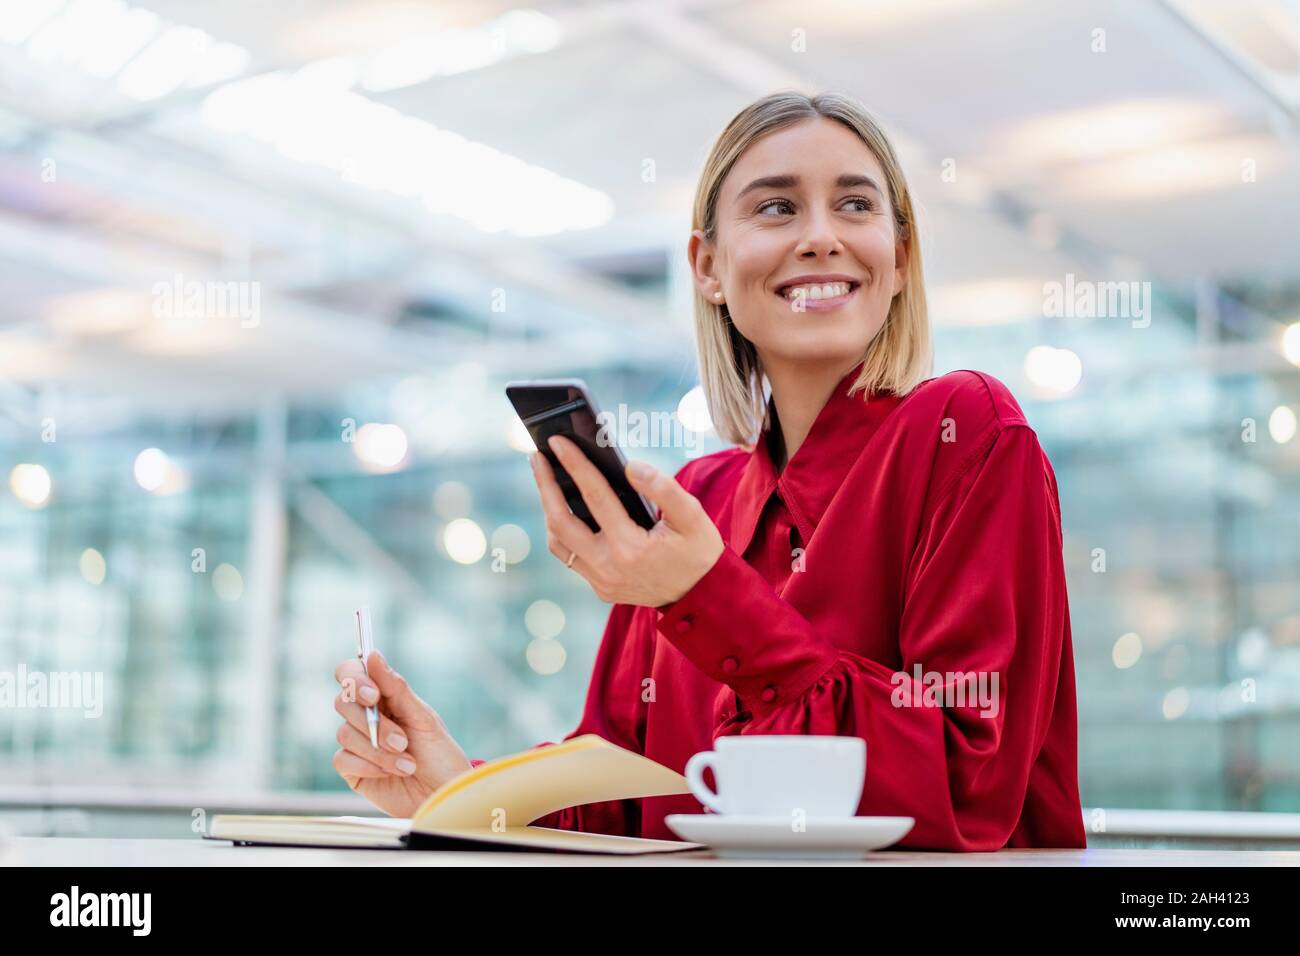 Young businesswoman with cell phone taking notes in a cafe Banque D'Images